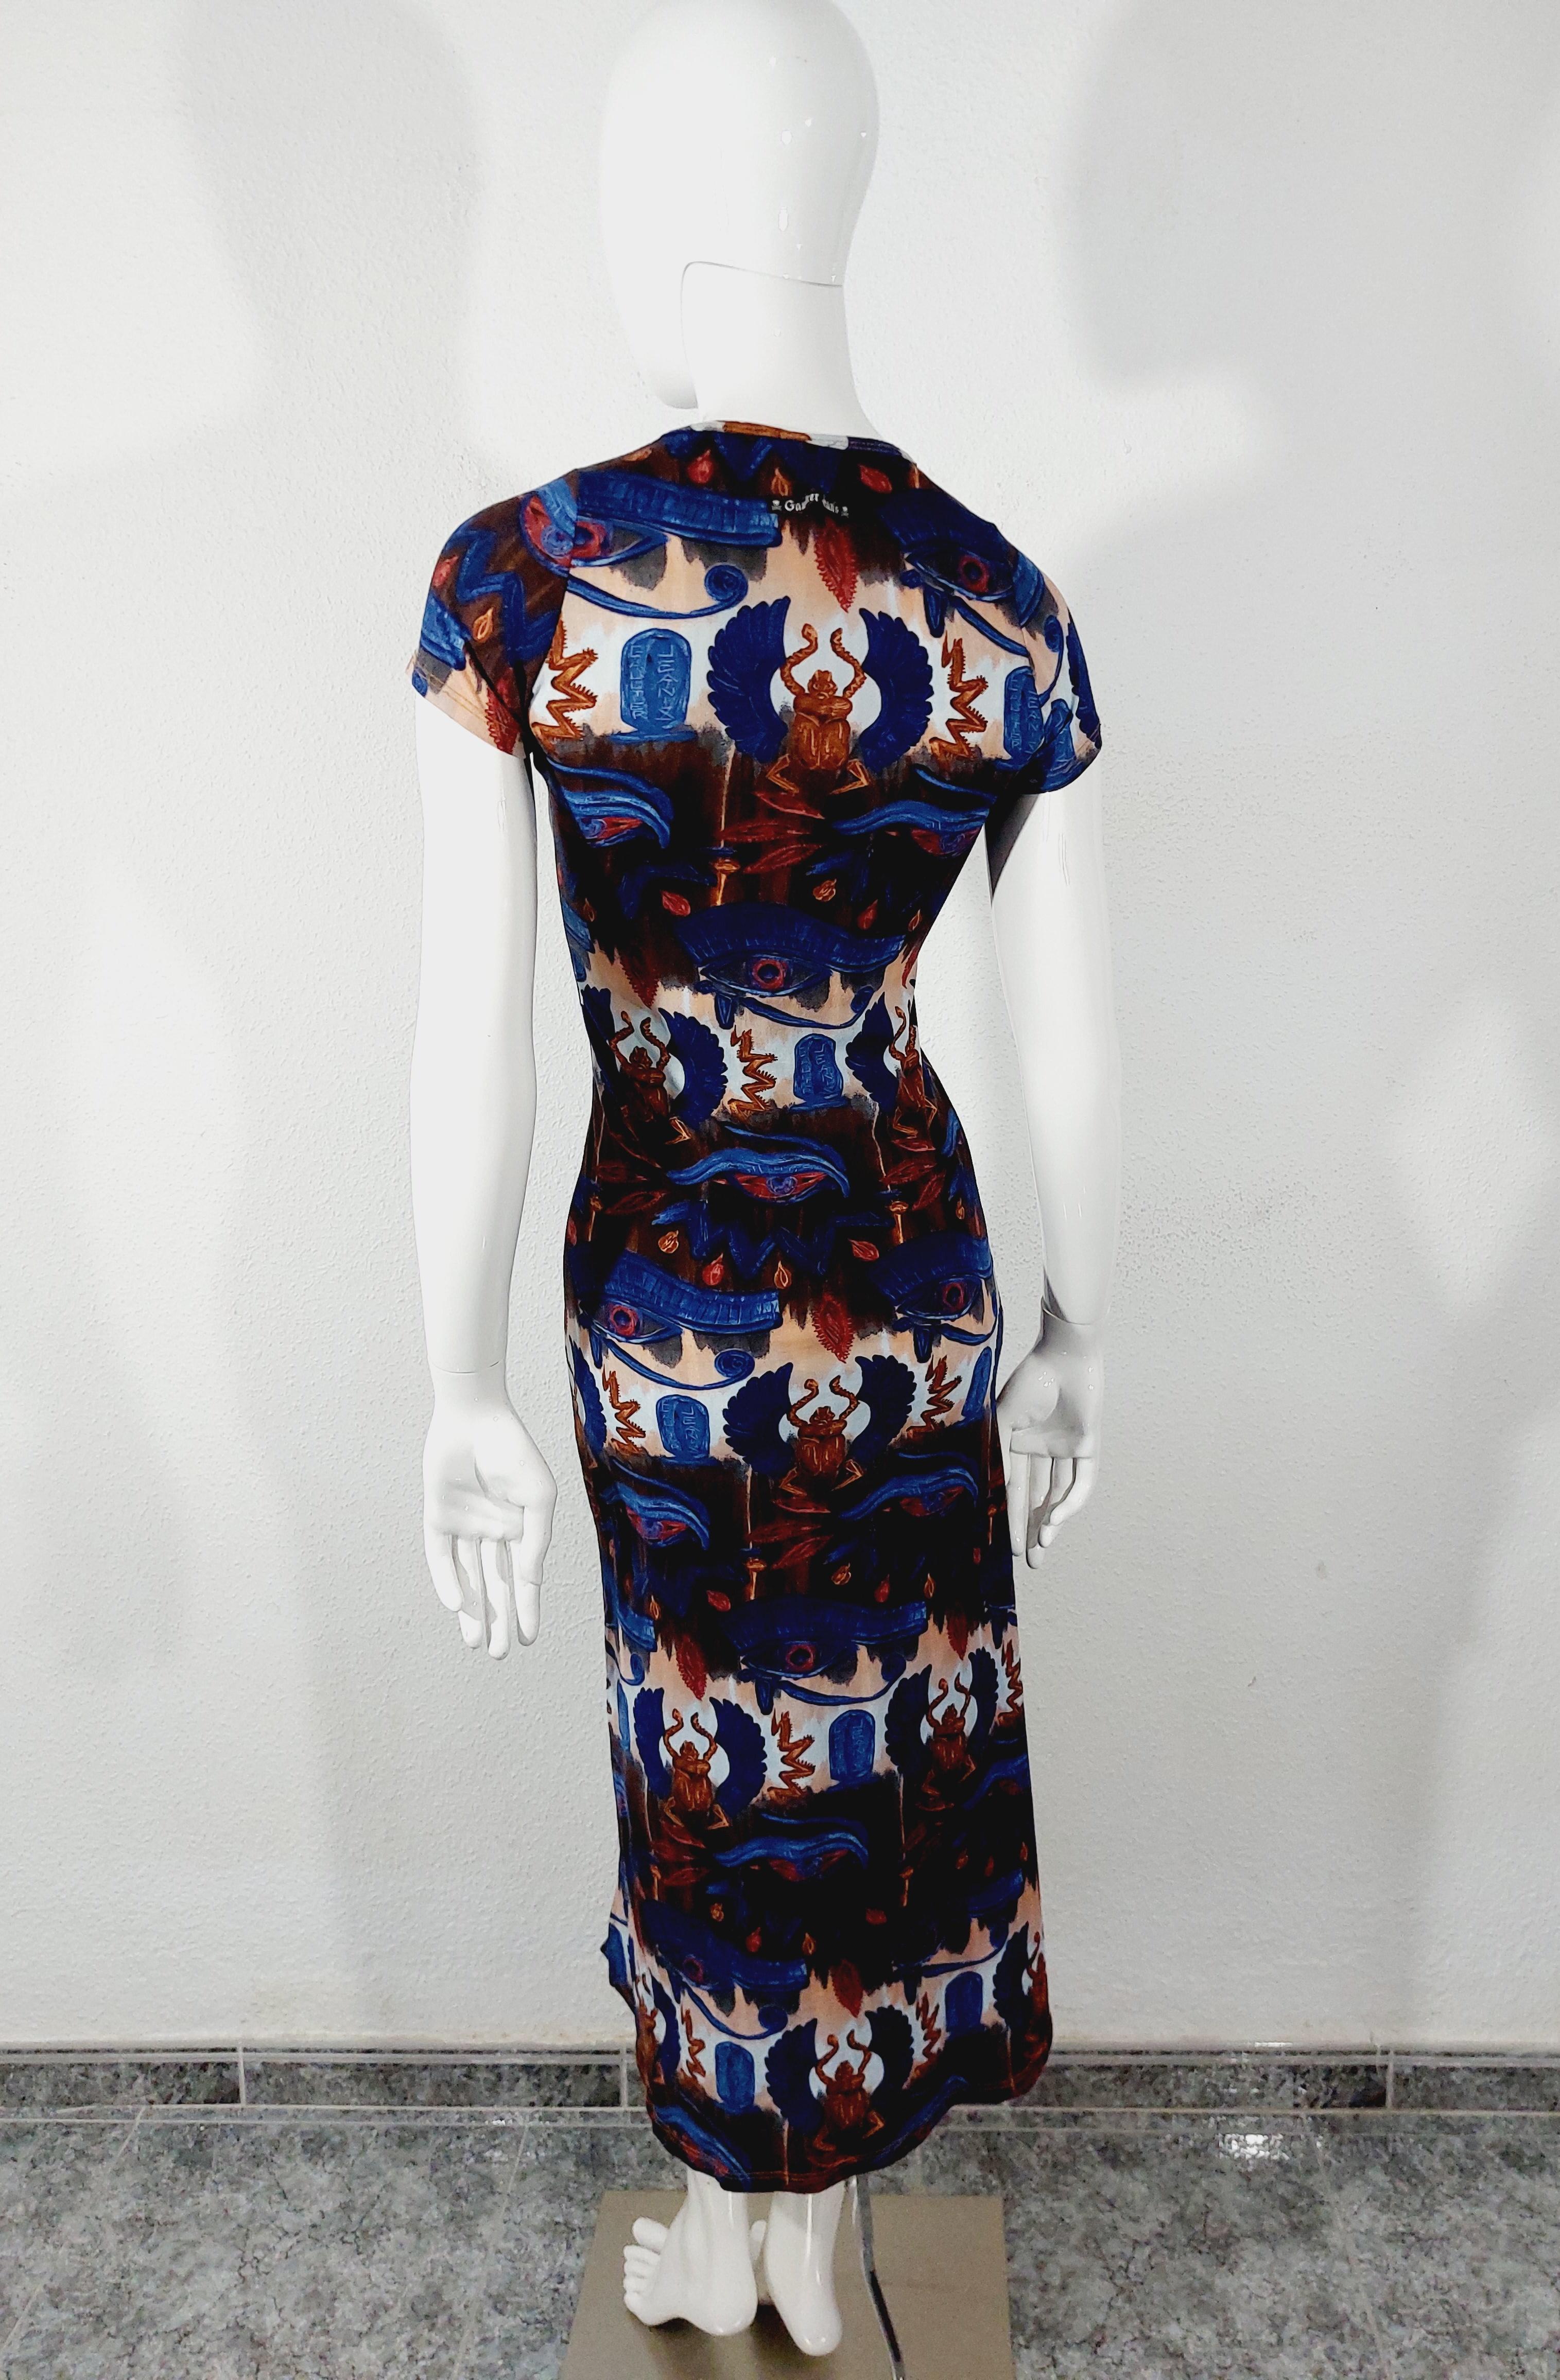 Jean Paul Gaultier Egypt SS 1997 Eye of Horus Scarab Hieroglyph Print Maxi Dress

Incredible vintage Jean Paul Gaultier dress, from Spring/Summer 1997. Featuring an iconic print consisting of Egyptian inspired imagery- the Eye of Horus, scarabs,